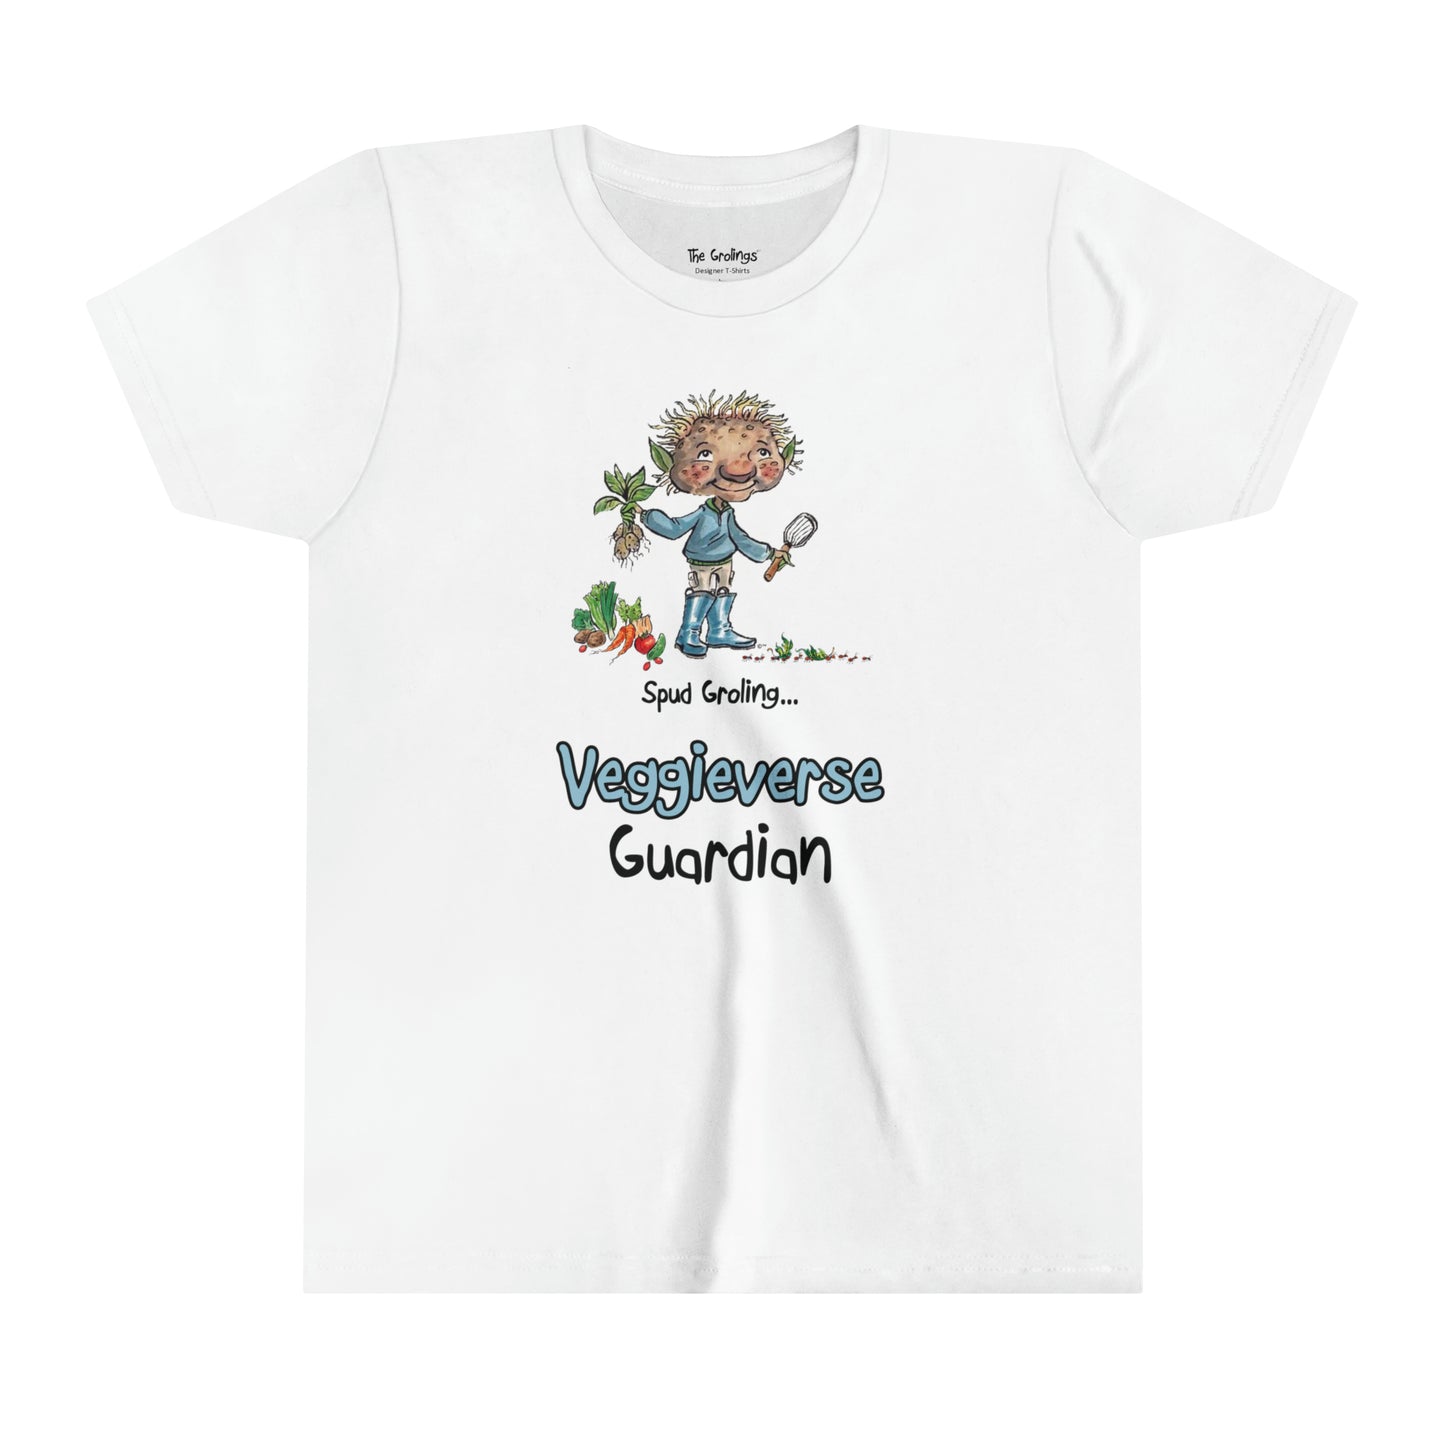 A white official USA Grolings kids t-shirt featuring the phrase 'Spud Groling... Veggieverse Guardian. The t-shirt showcases Spud Groling, standing with a freshly harvested potato plant in his hand, surrounded by a variety of fresh vegetables. Spud Groling's message encourages the wearer to embrace a role as a protector and caretaker of the vegetable world. 